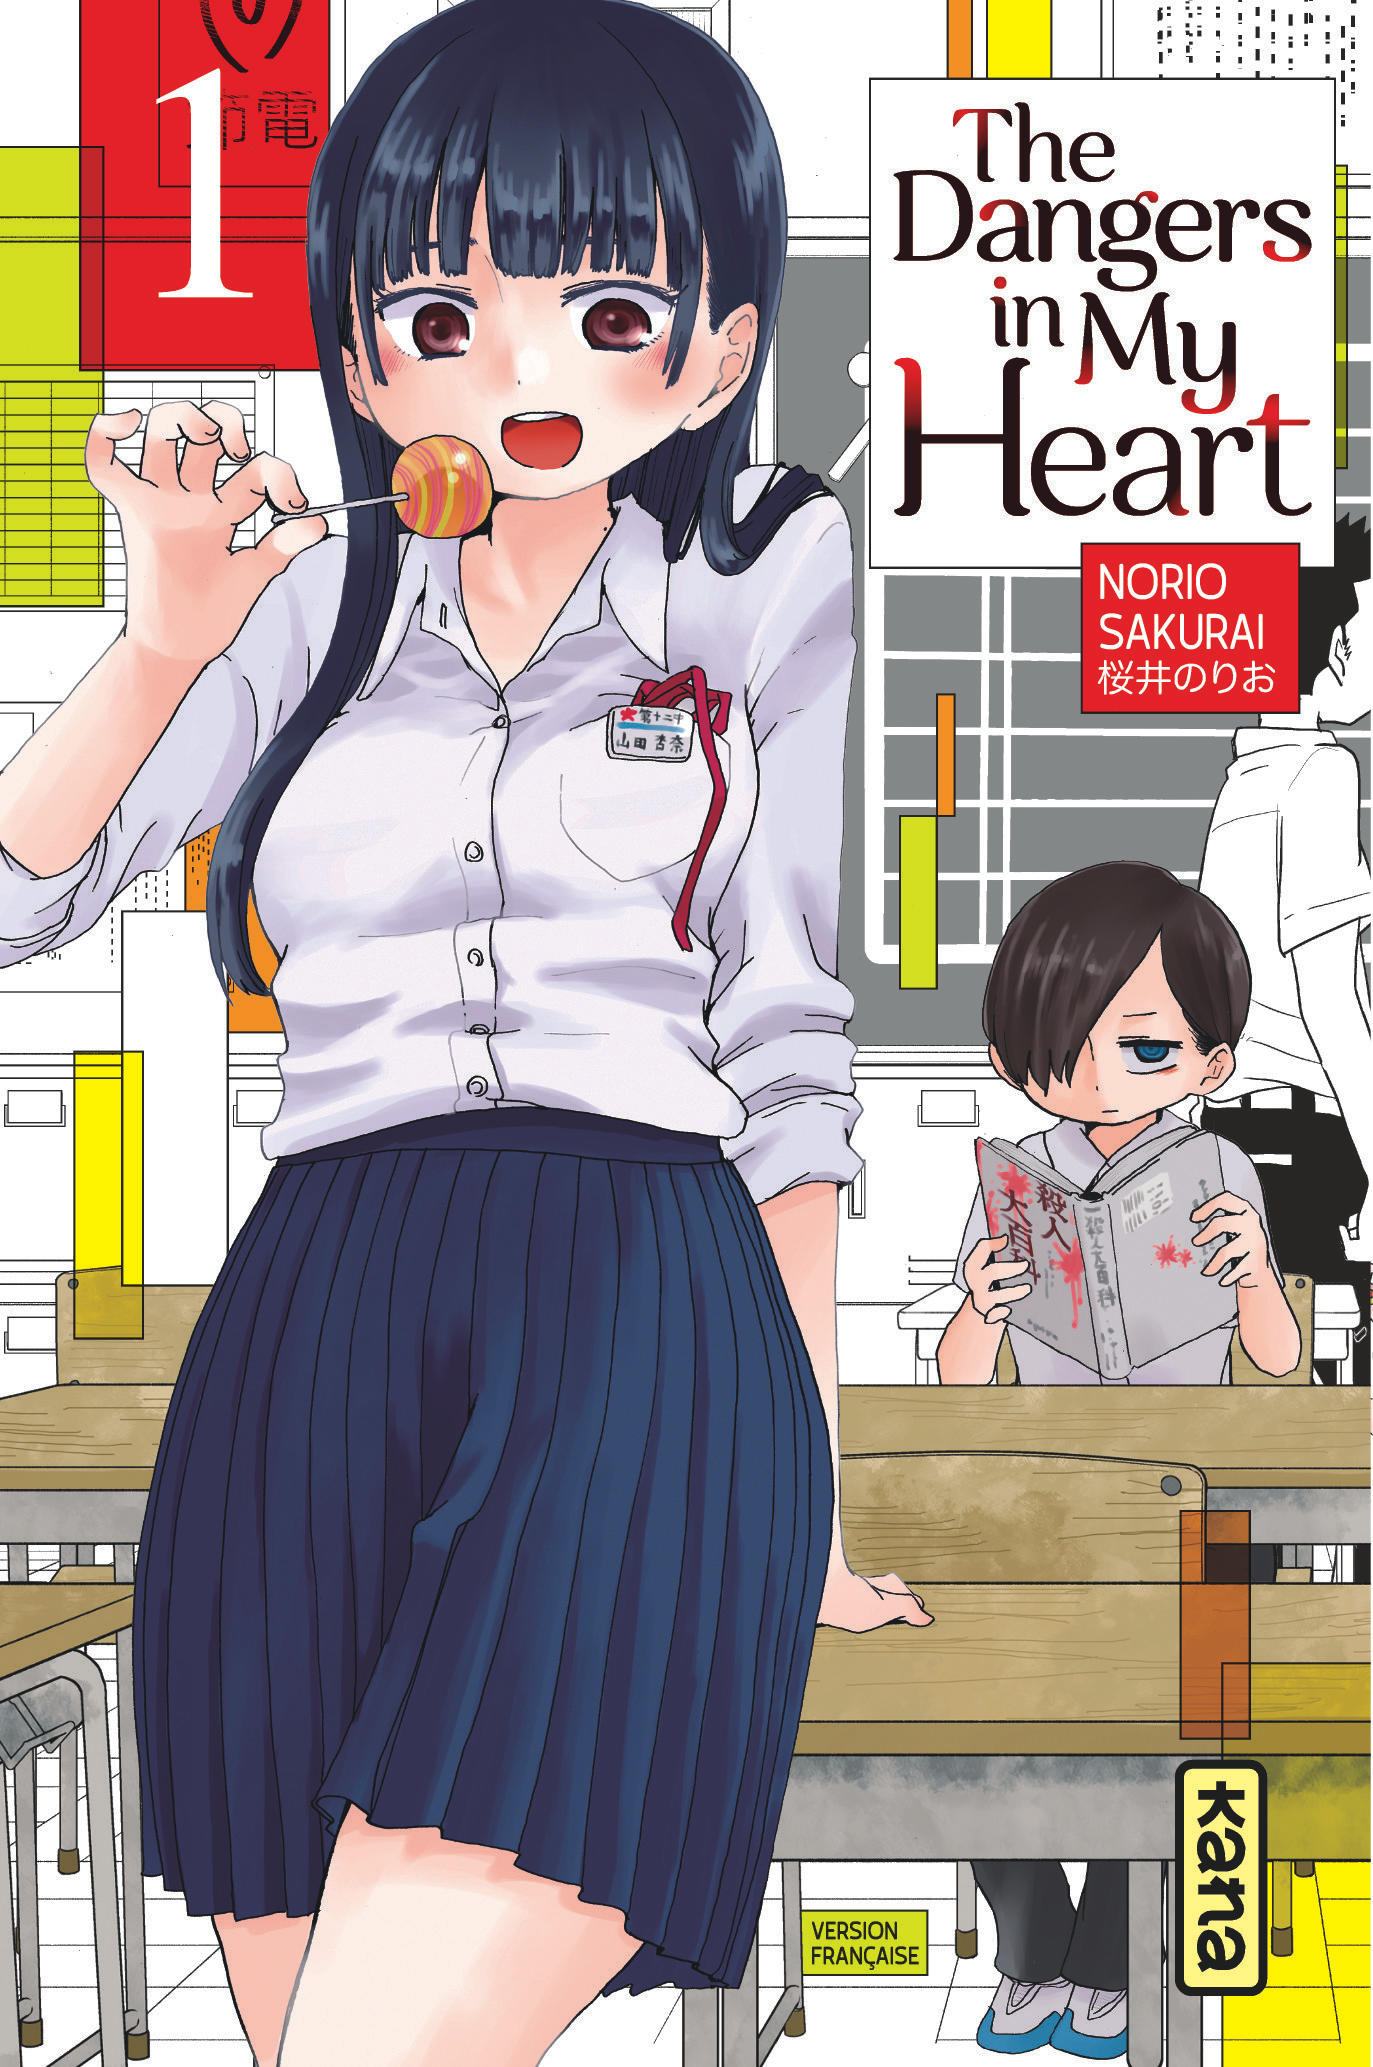 The Dangers in my heart – Tome 1 - couv